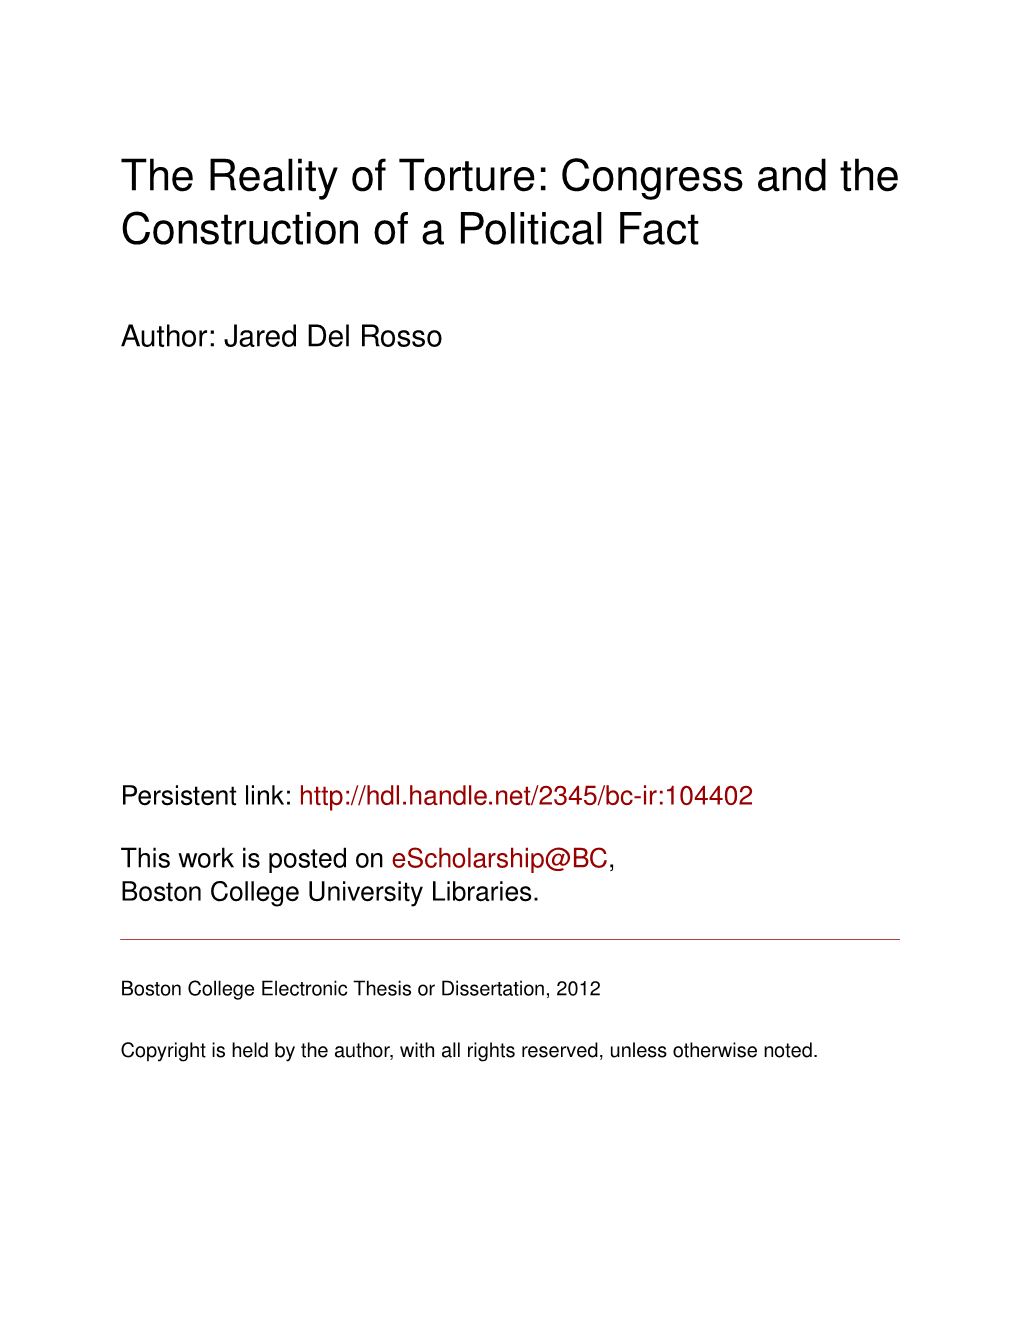 The Reality of Torture: Congress and the Construction of a Political Fact